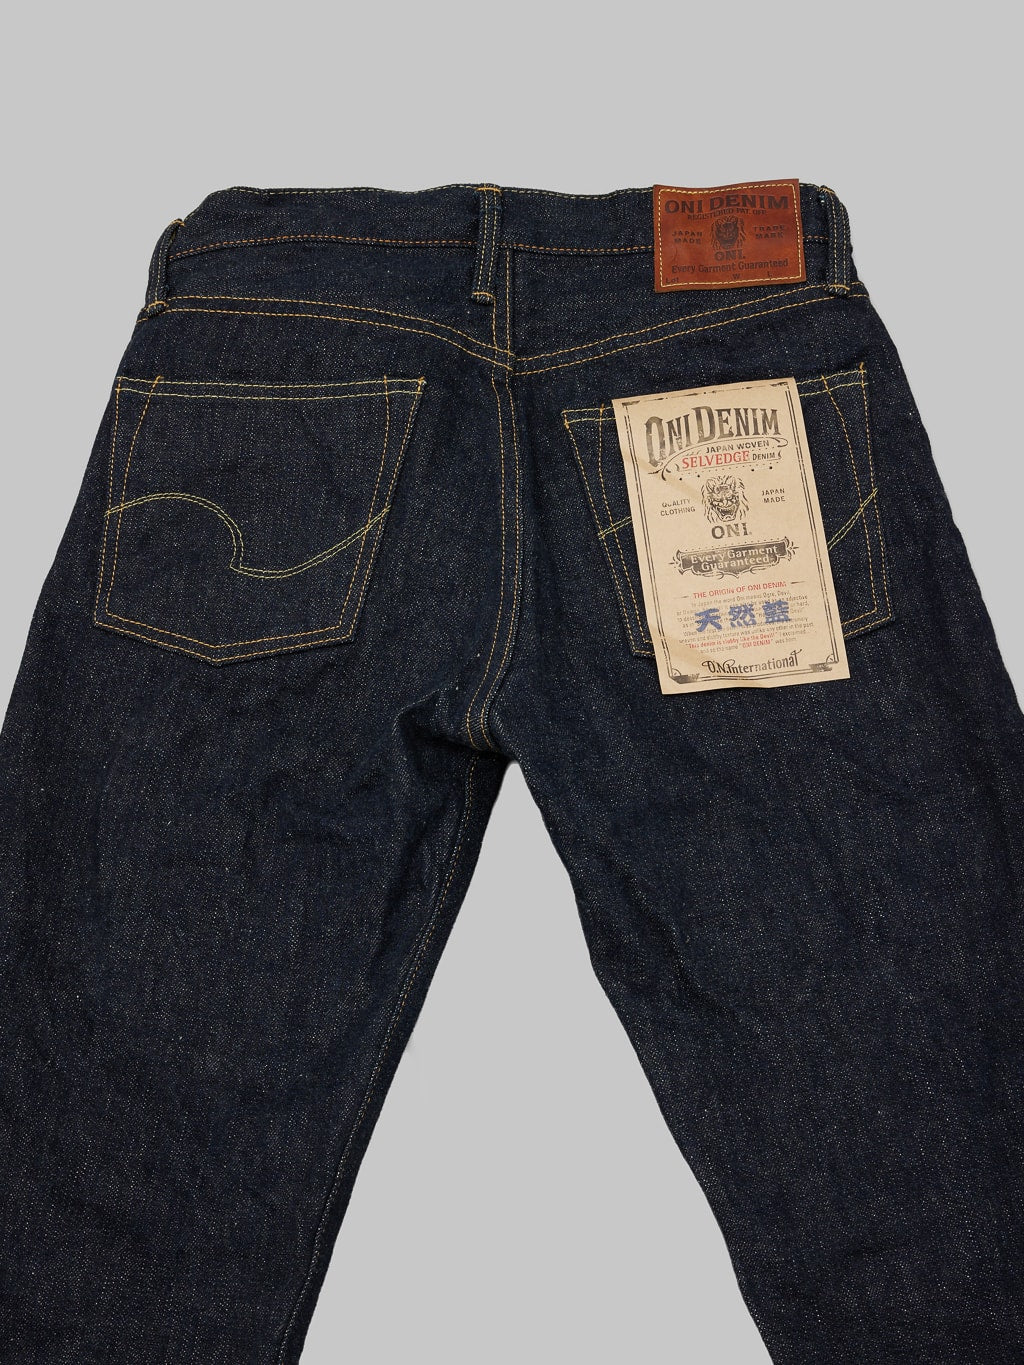 ONI 525 Natural Indigo Rope Dyeing Denim Classic Straight Jeans back pockets